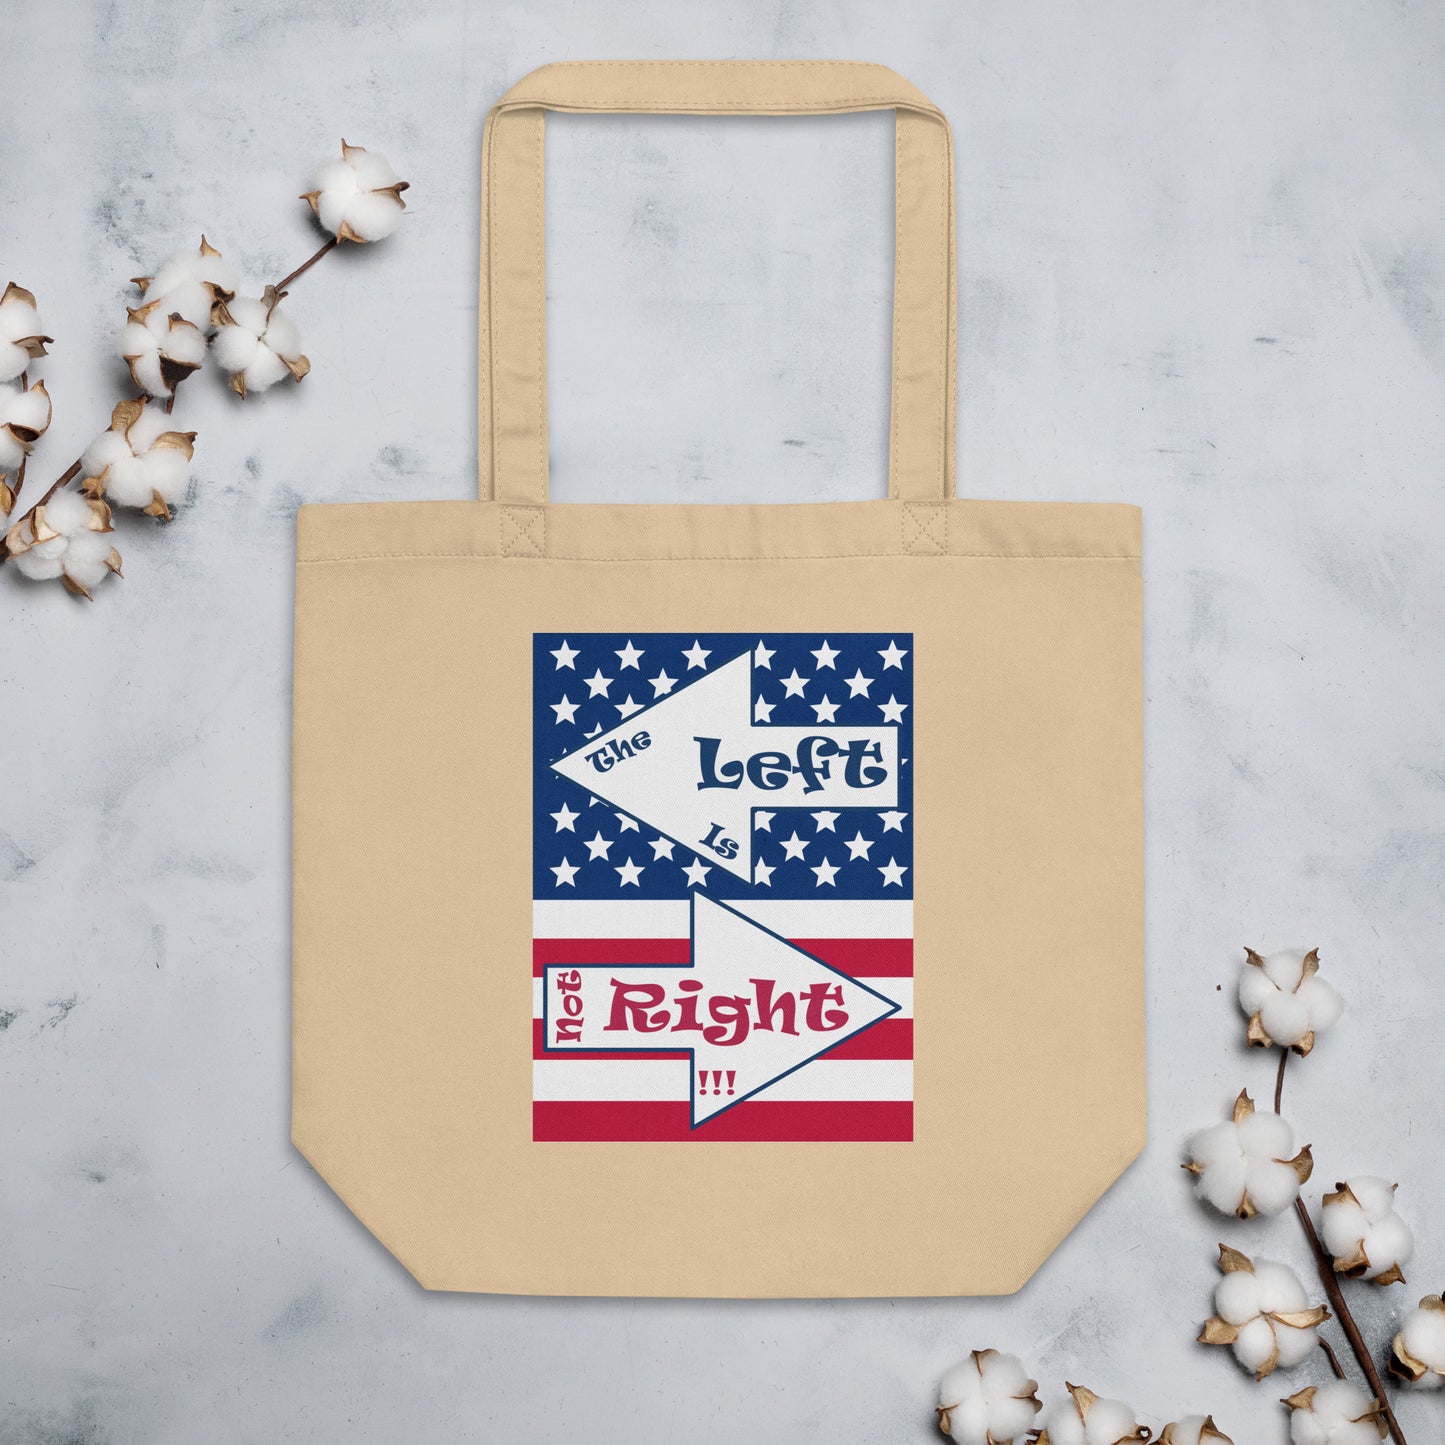 A017 Tote – Eco Tote Bag Featuring the Stars and Stripes of the U S Flag with the Text “The Left Is Not Right.”